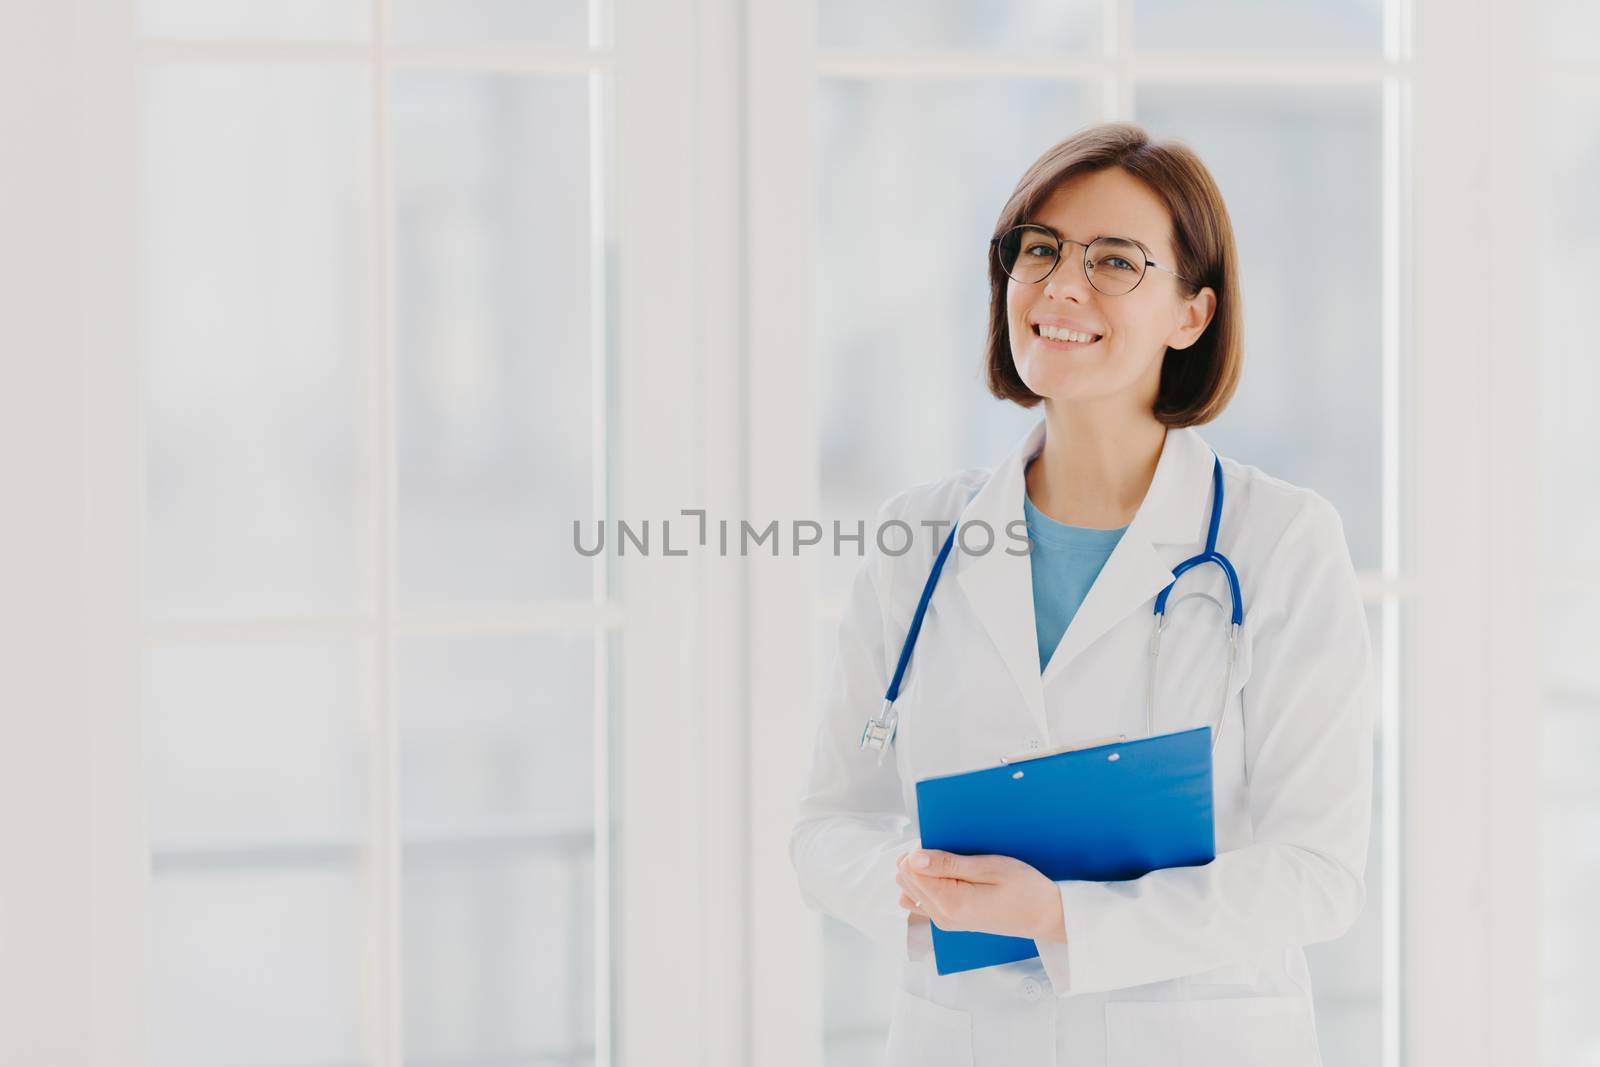 Experienced woman pediatrician stands with clipboard in cabinet, wears white medical coat with stethoscope, gives excellent medical treatment, has happy expression, ready to give consultancy by vkstock